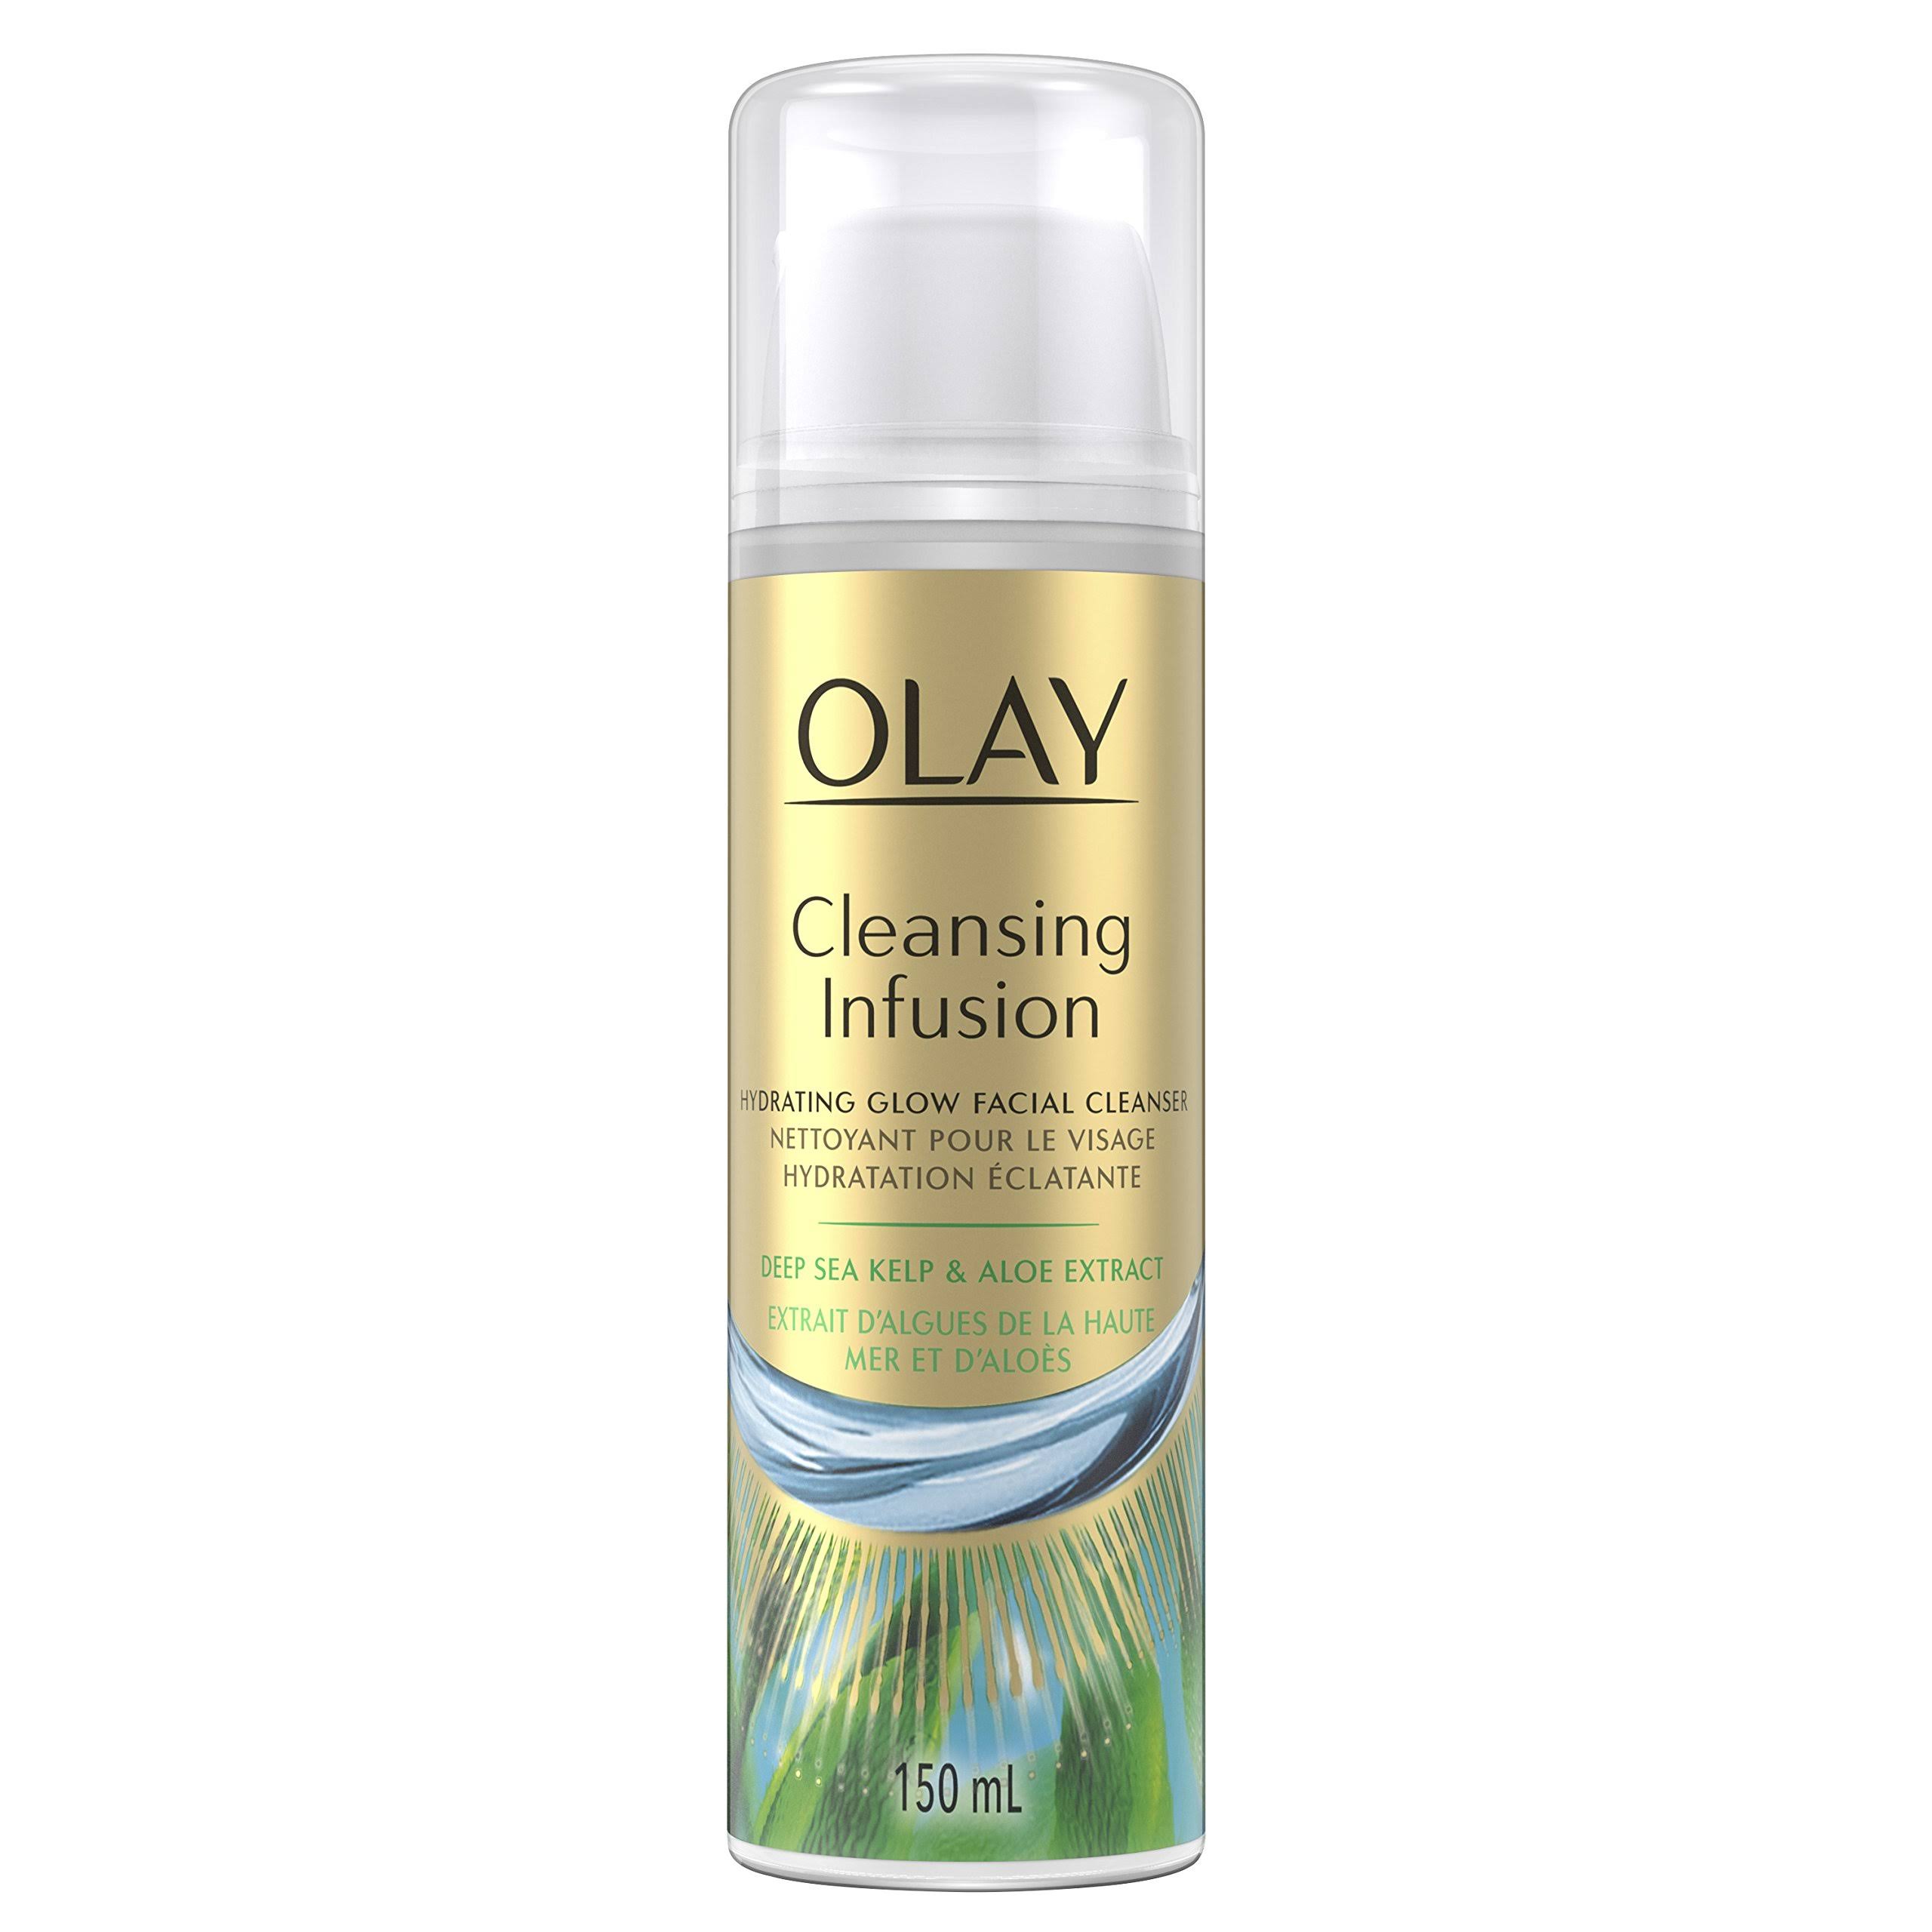 Olay Cleansing Infusion Hydrating Glow Facial Cleanser - 5oz